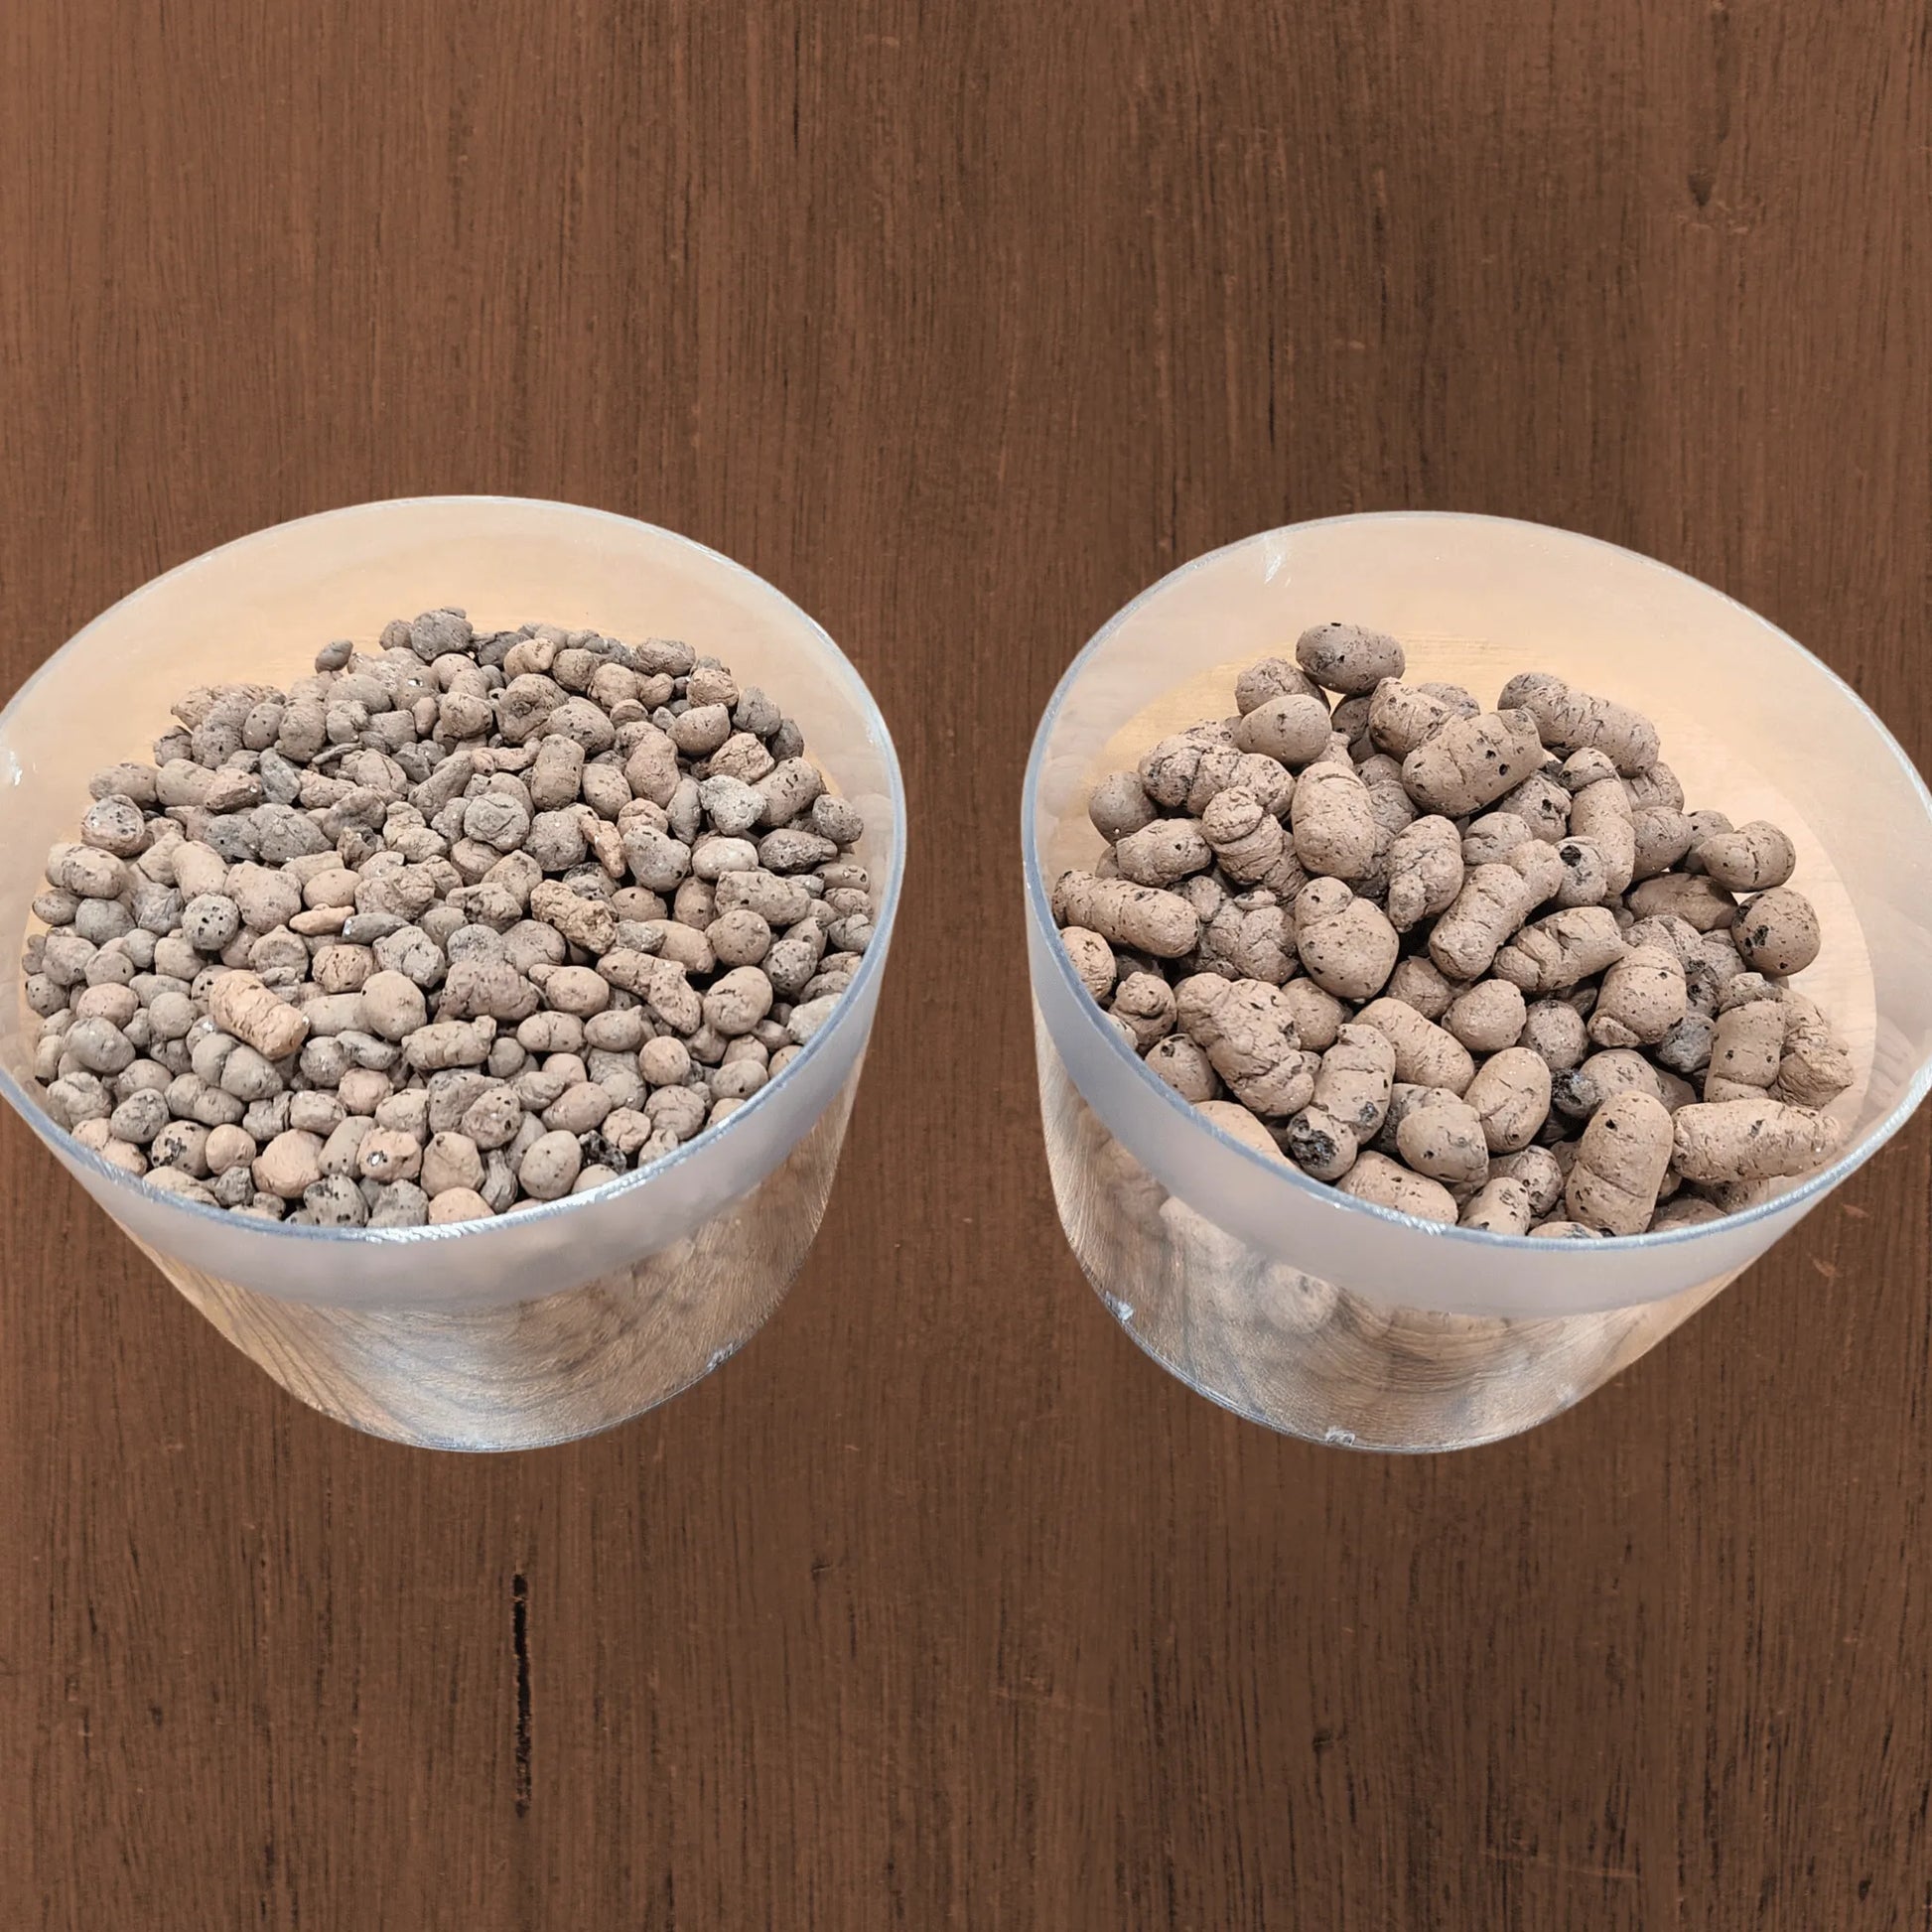 Buy Lightweight Expanded Clay Aggregate -500G Online at Lalitenterprise